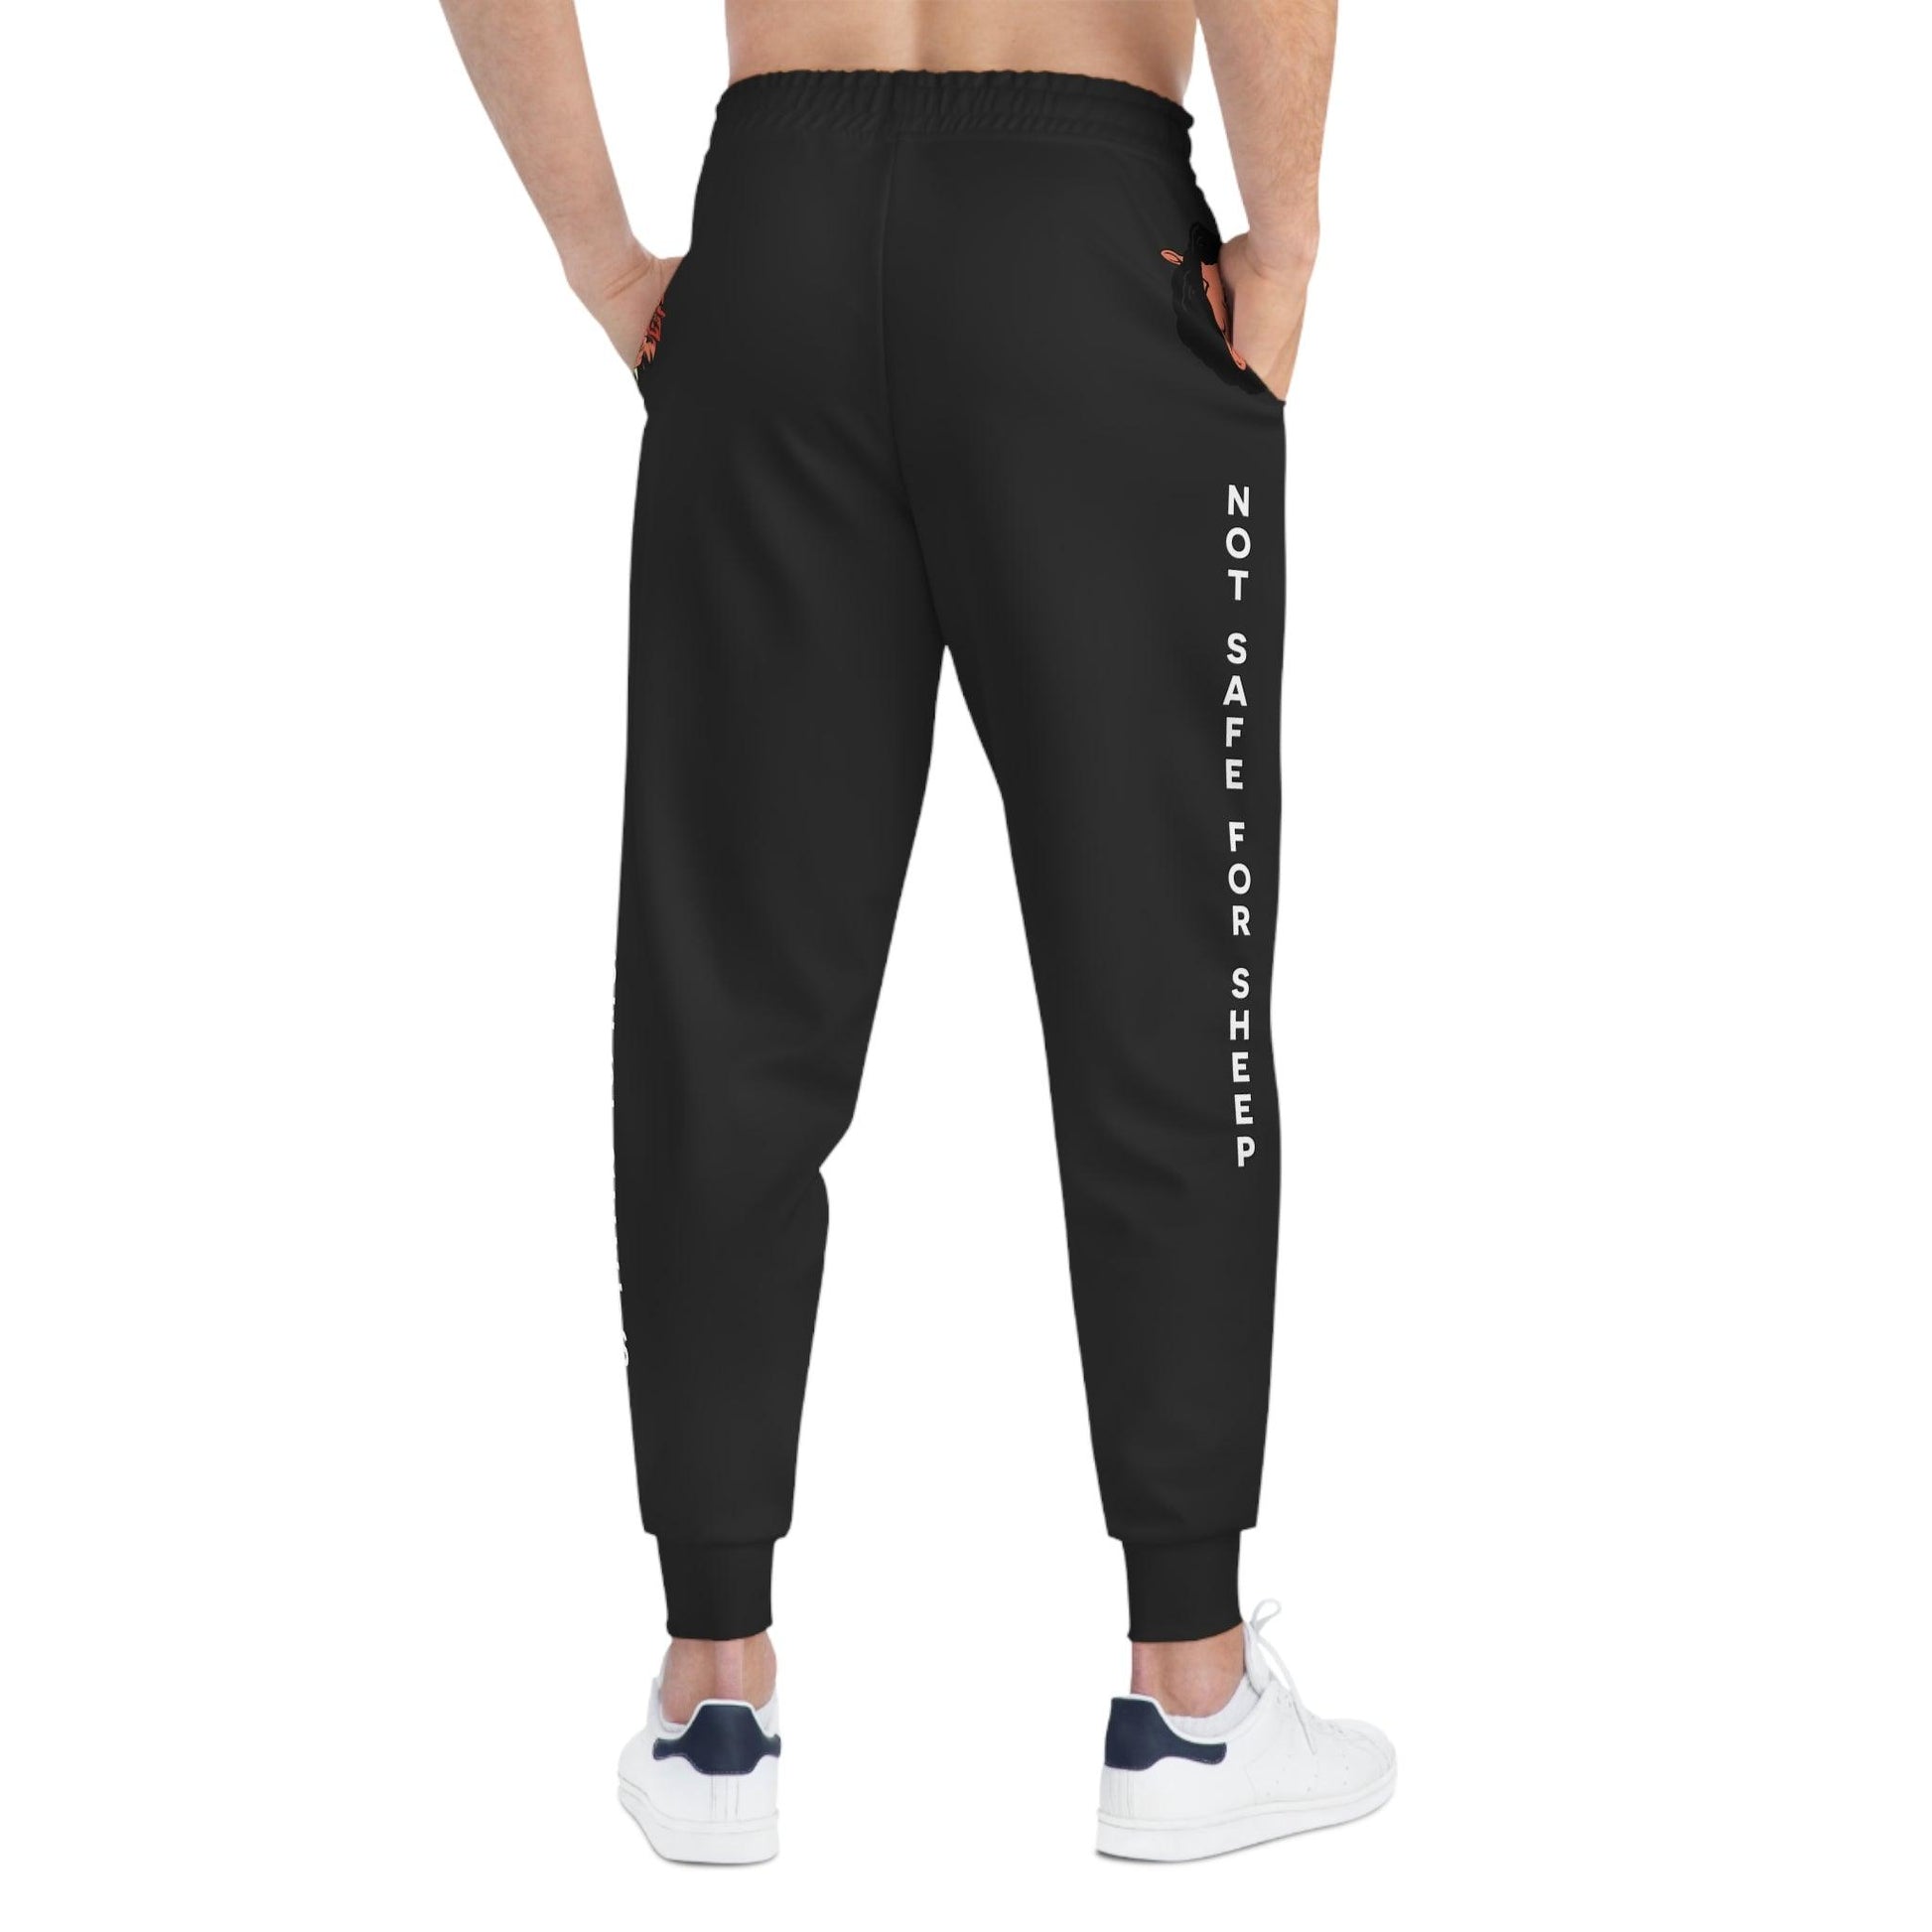 We run these streets - Athletic Joggers - Shaneinvasion